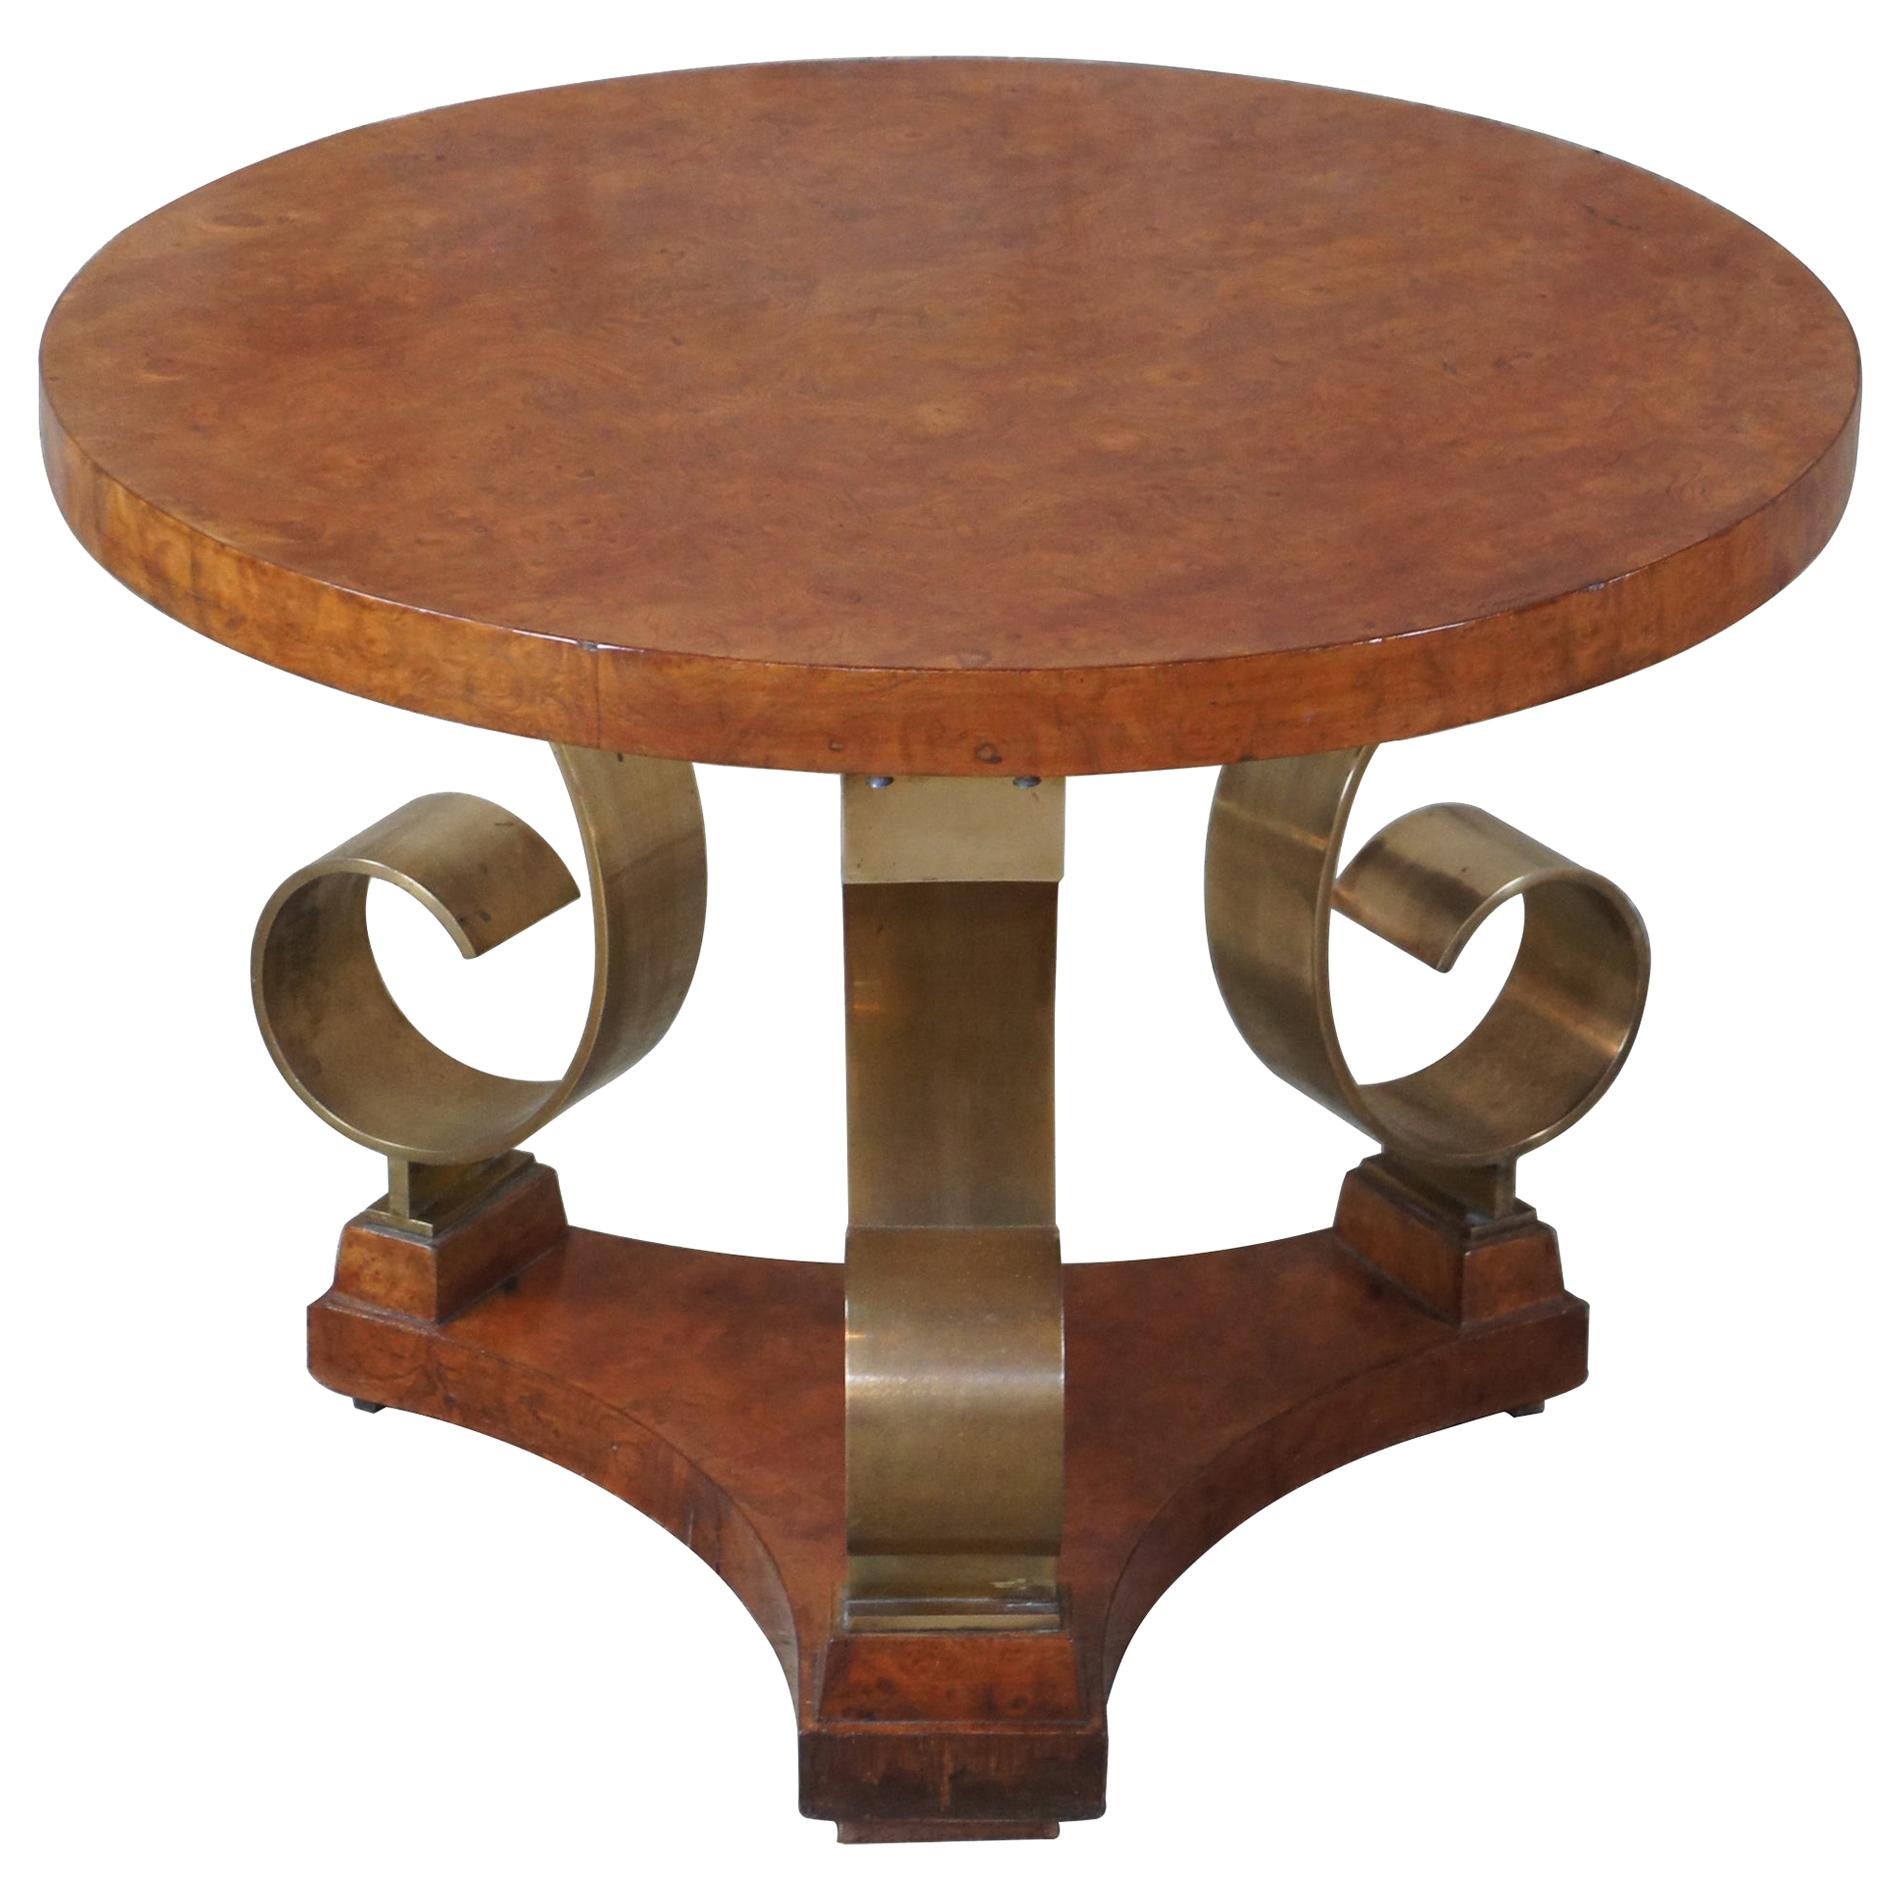 Italian Neoclassical Olive Burl Scrolled Brass Round Gueridon Martini Table MCM For Sale